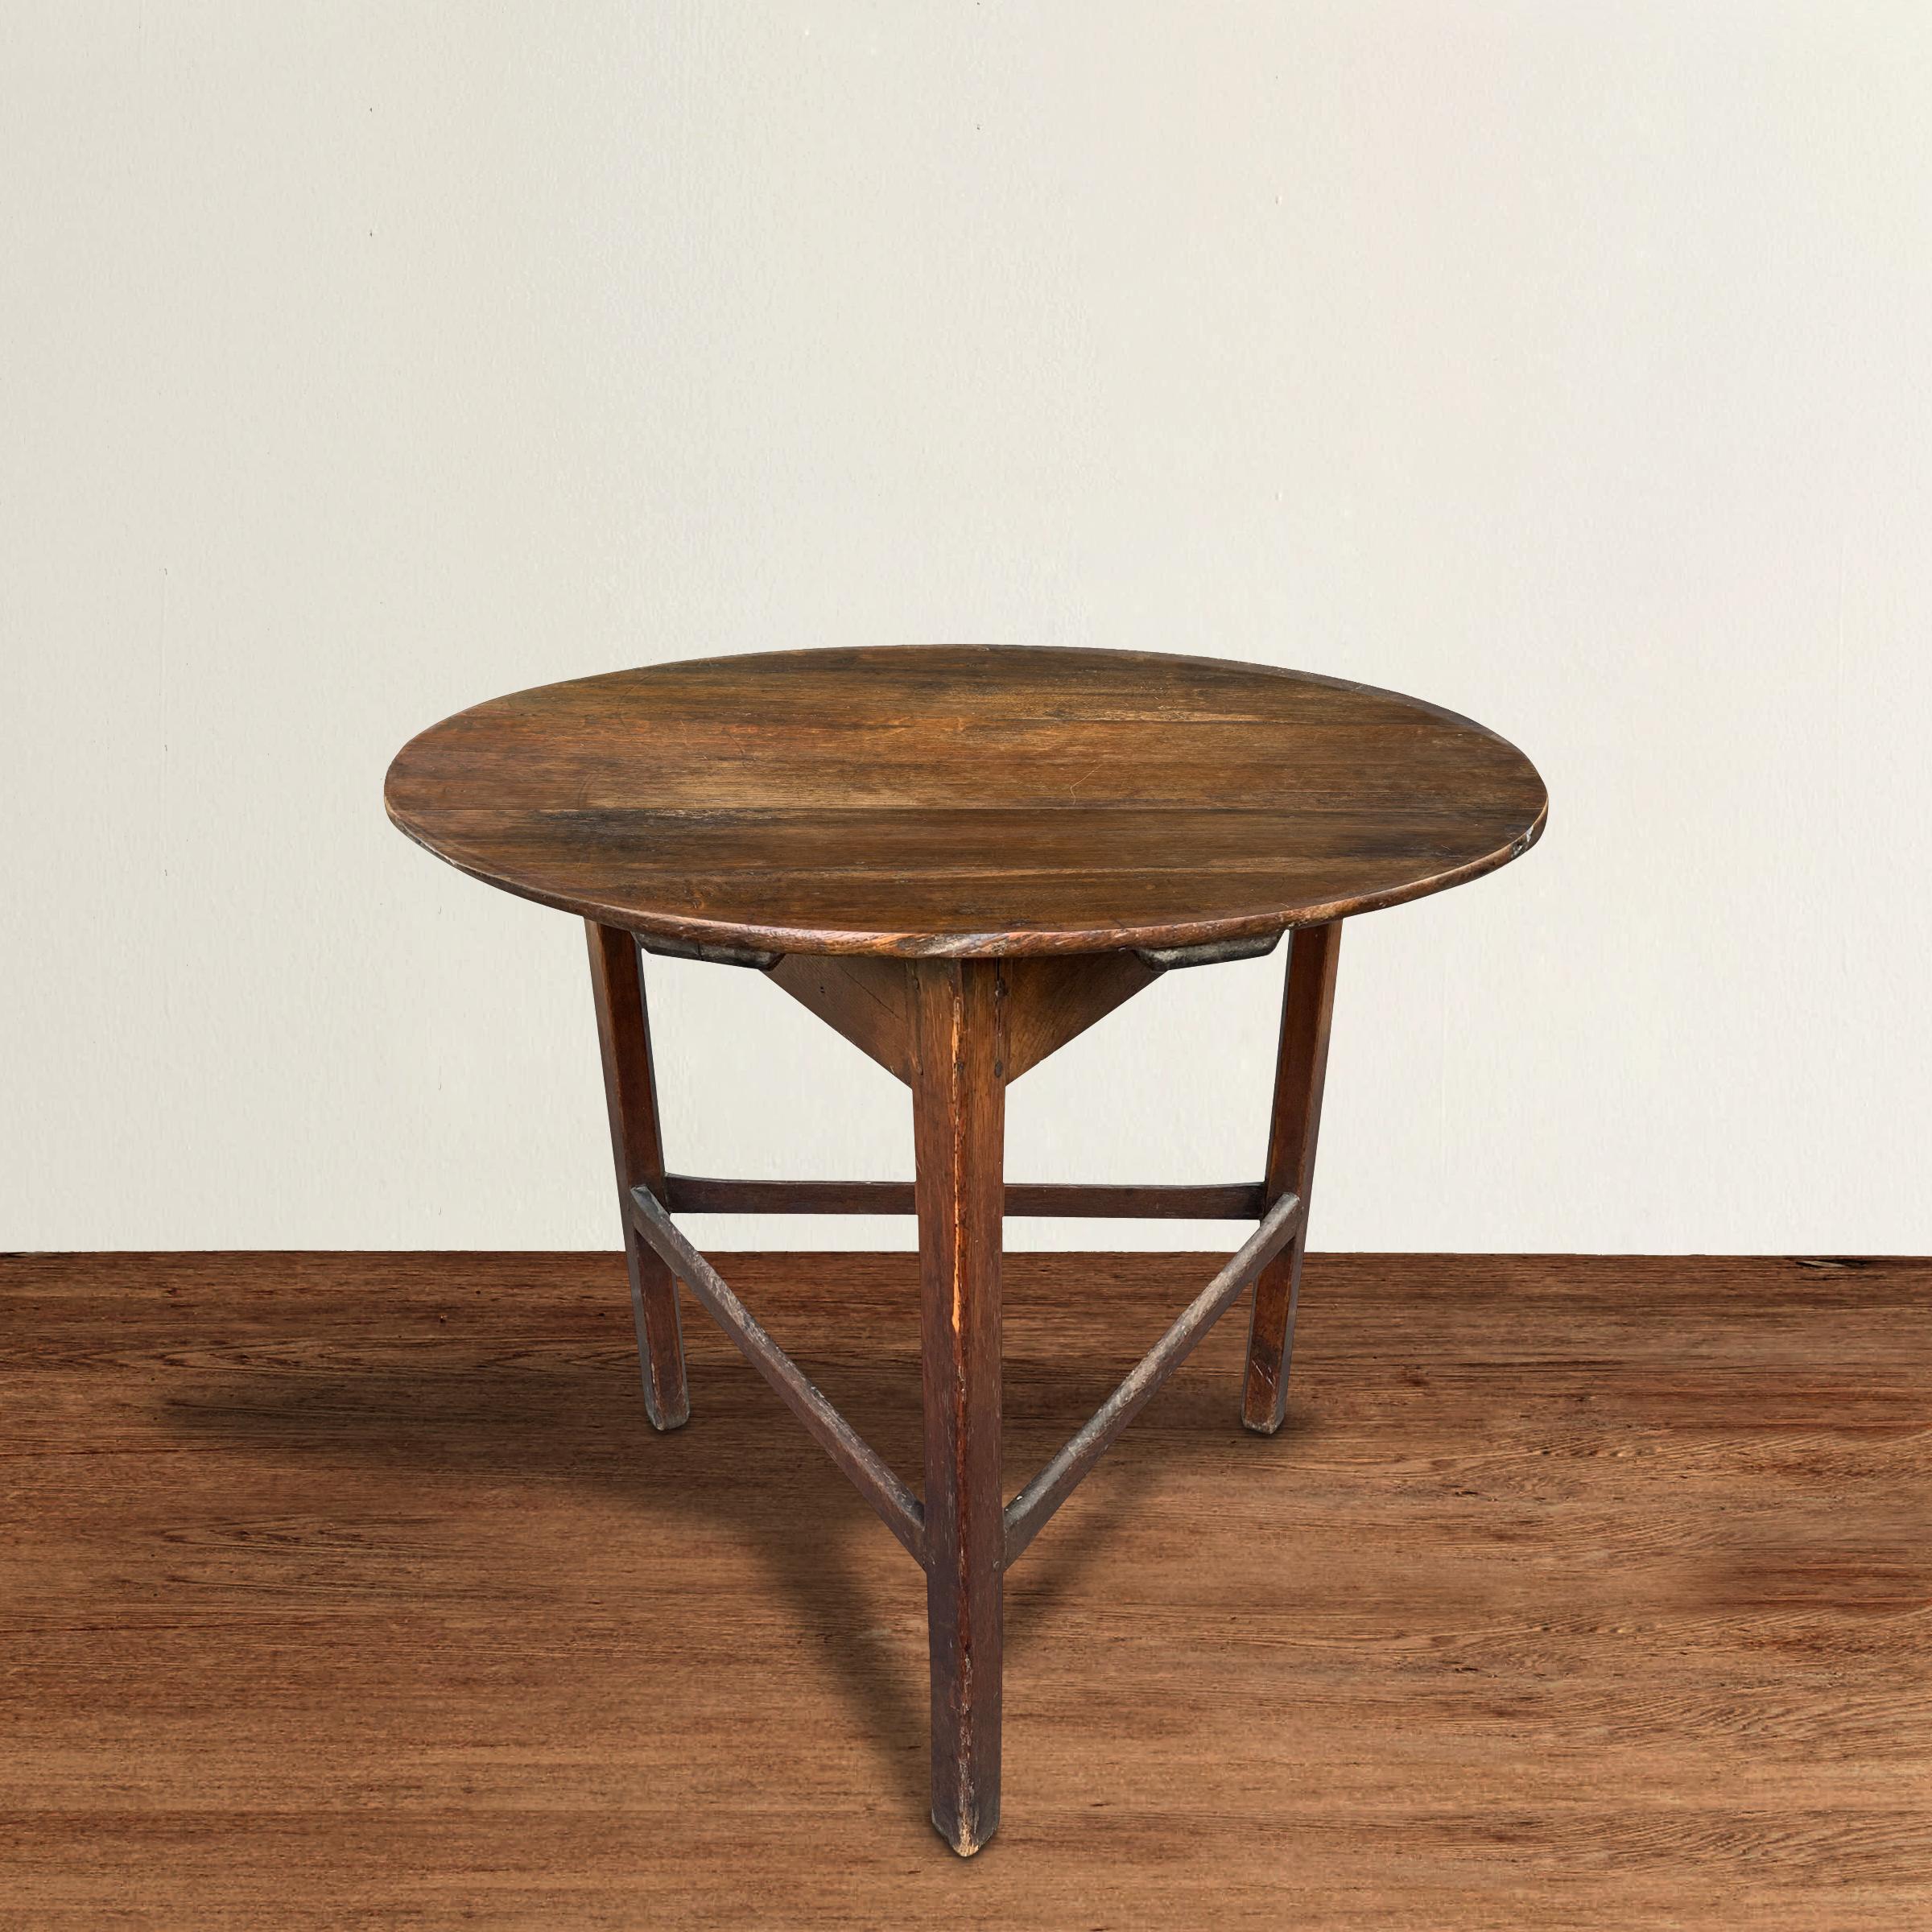 A simple but chic 18th century English cricket table with clean lines designed with three legs with simple stretchers worn from two hundred years of use, and a round top with a beautiful well-worn finish. The perfect side table, end table, or